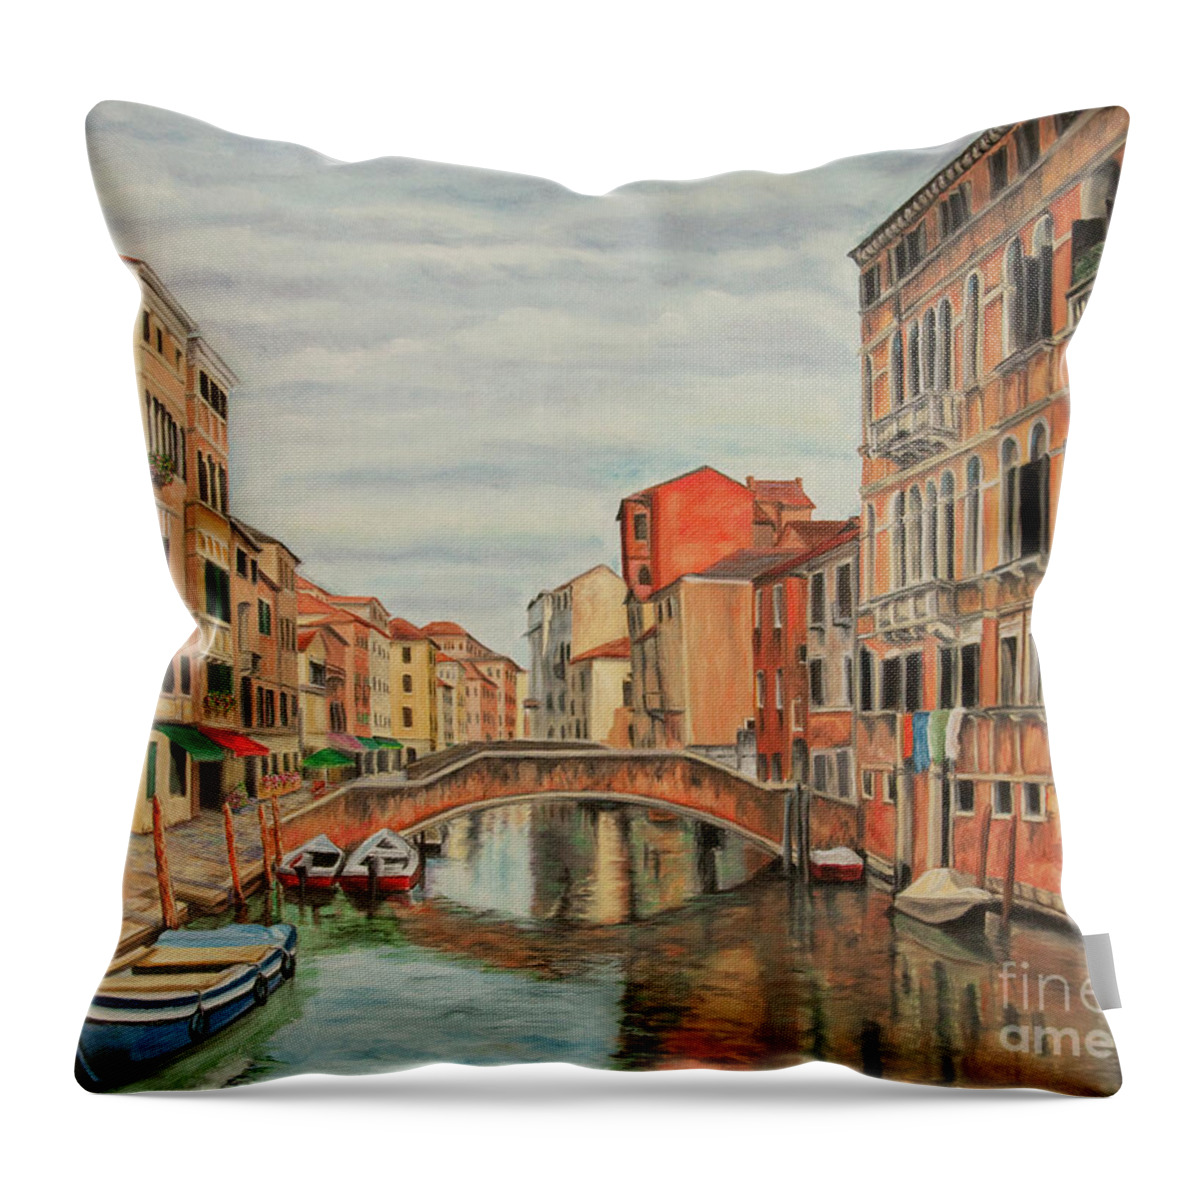 Venice Painting Throw Pillow featuring the painting Colorful Venice by Charlotte Blanchard